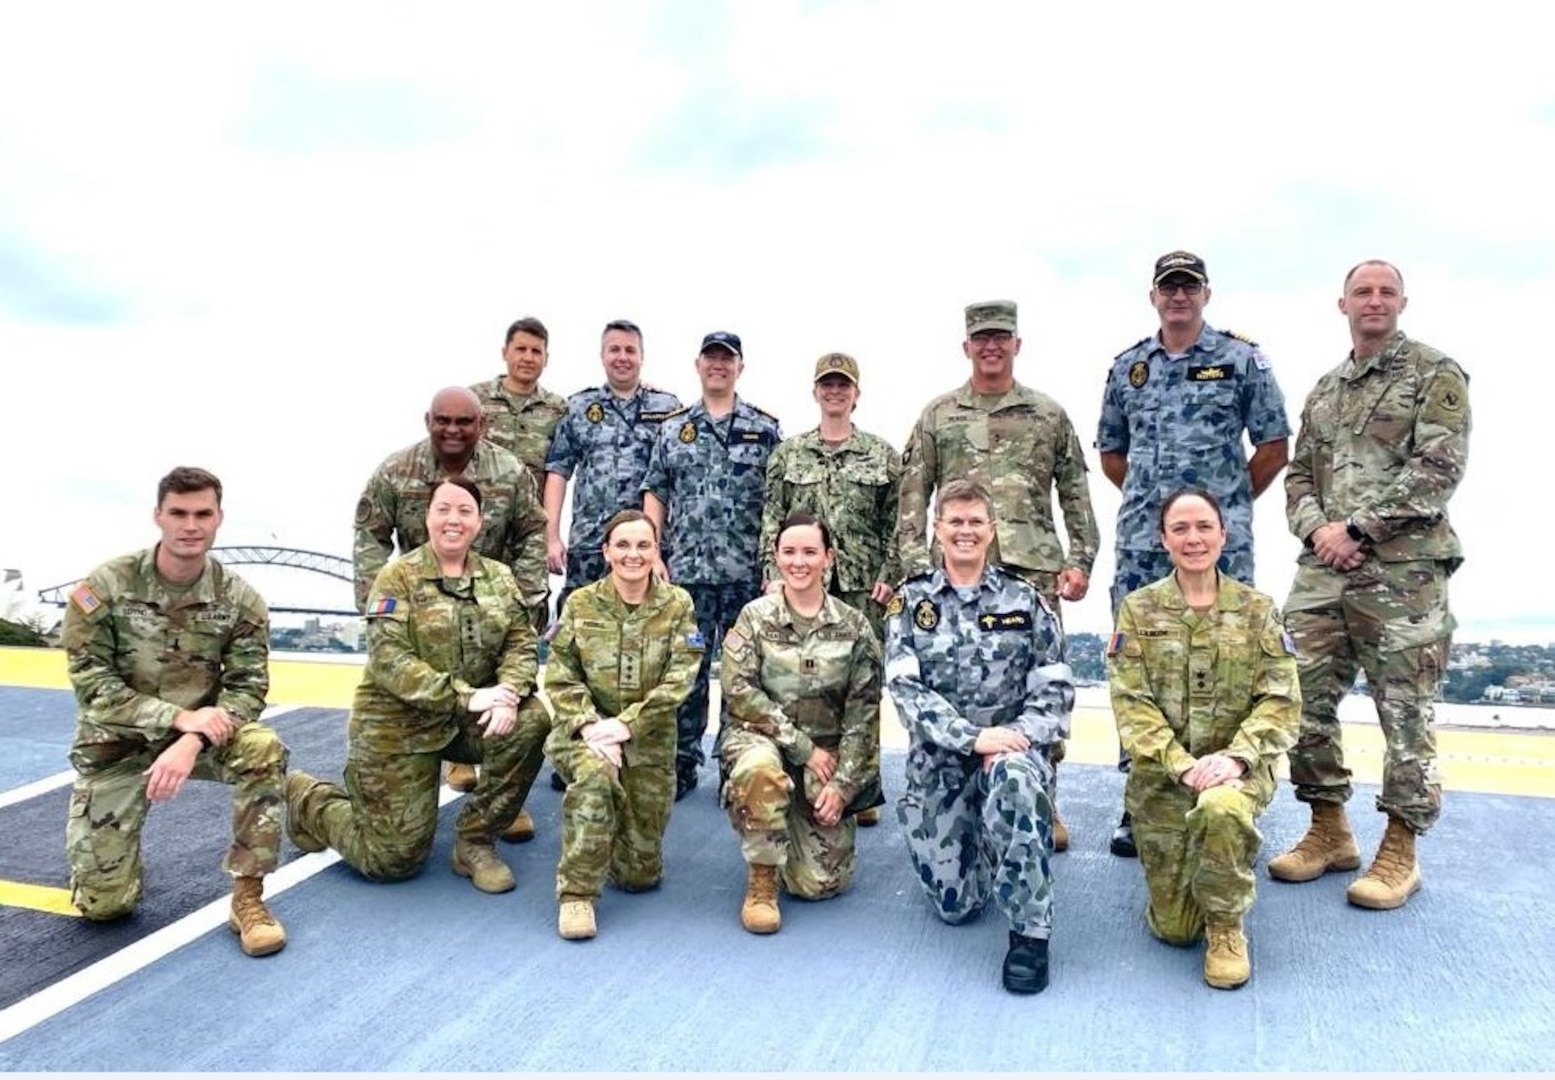 SYDNEY, Australia – Members of the U.S. Medical Delegation and Royal Australian Navy pose for a picture on the deck of the HMAS Adelaide April 26, 2022, Sydney, Australia. This was part of an April 25 to May 4, 2022, U.S. health delegation visit to enhance Australian-U.S. health interoperability.